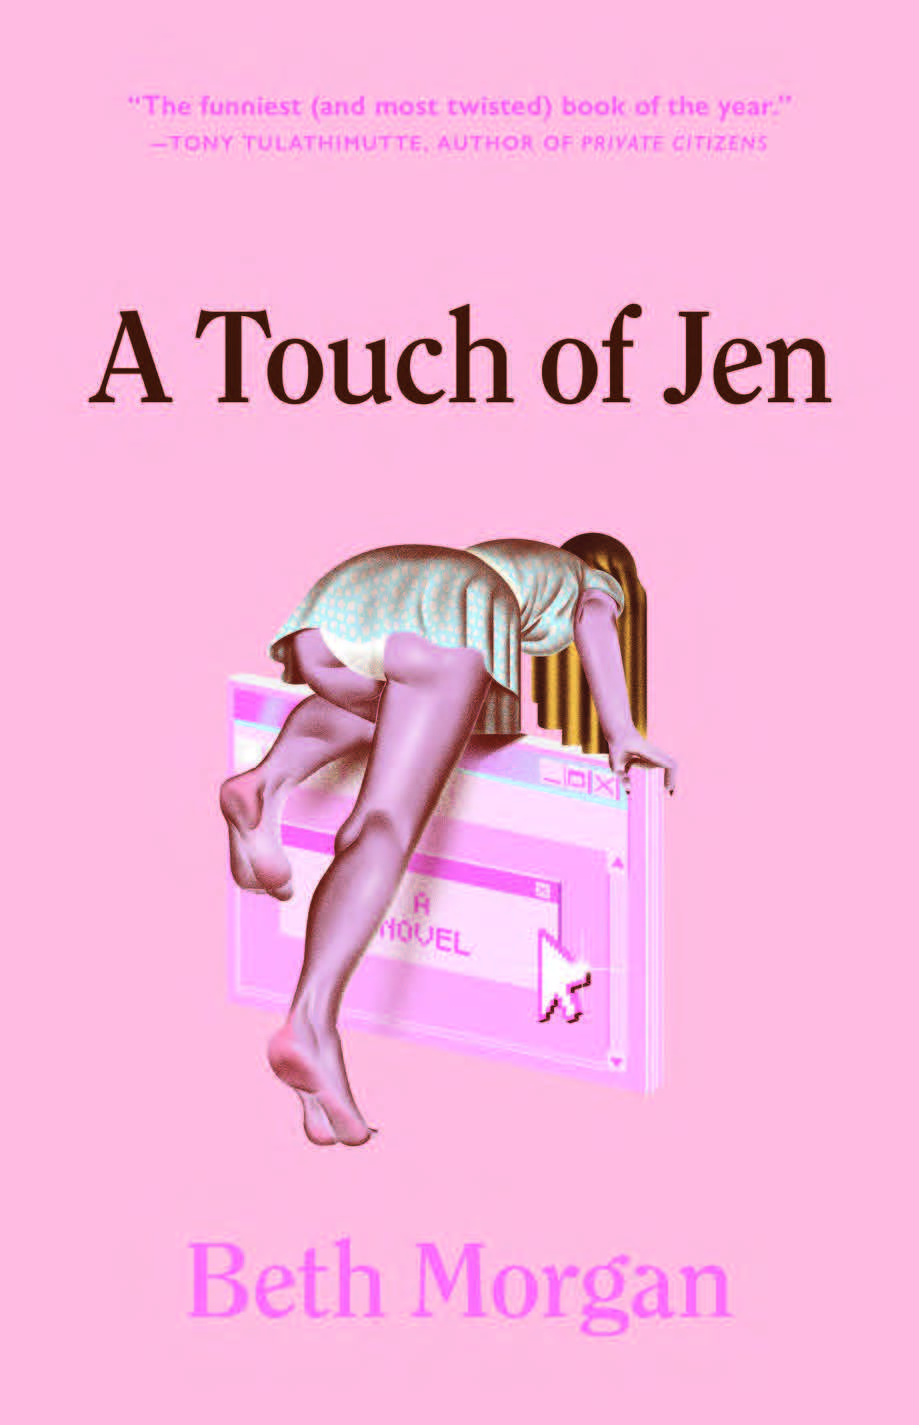 Virtual Book Launch: A Touch of Jen by Beth Morgan in conversation with Kristen Arnett